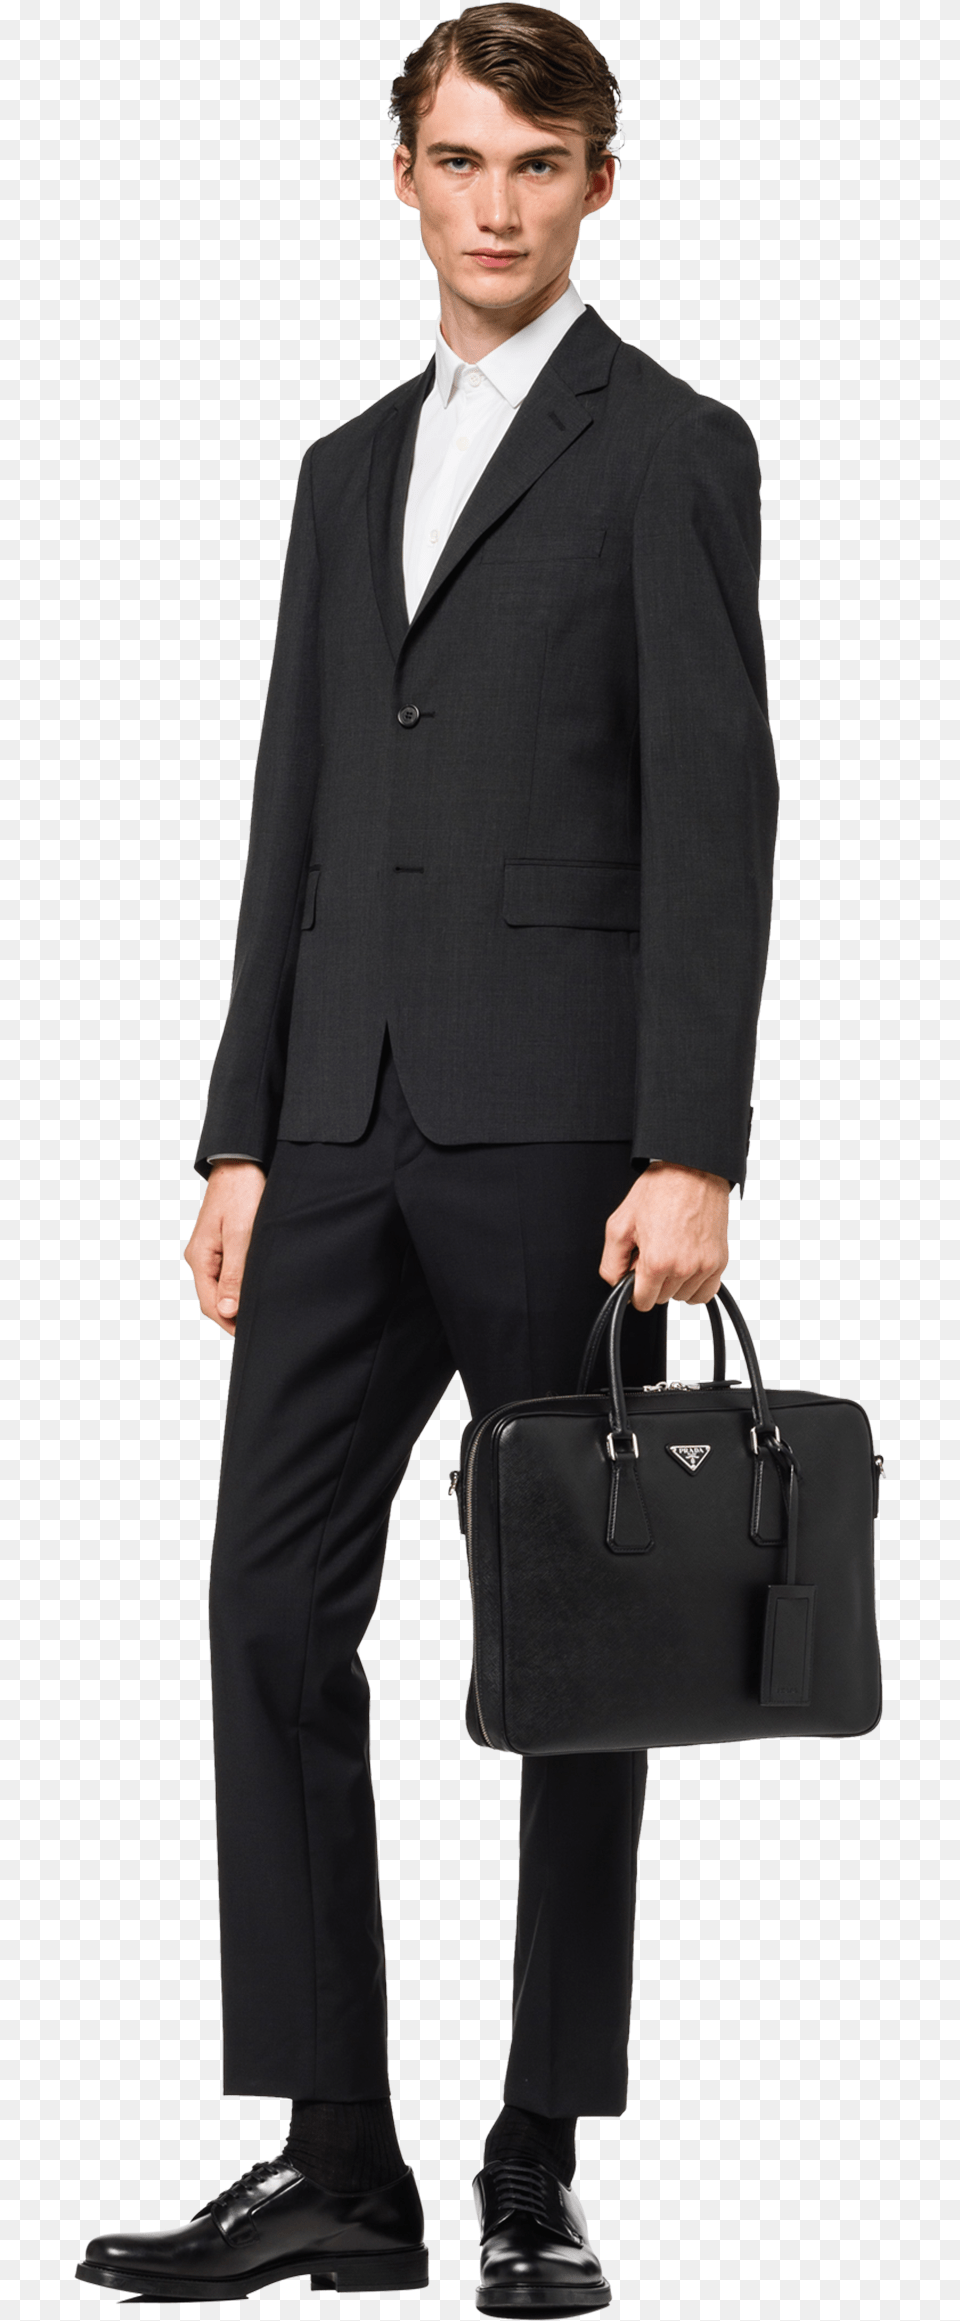 Saffiano Leather Briefcase Prada Briefcase Wearing, Formal Wear, Bag, Suit, Clothing Png Image